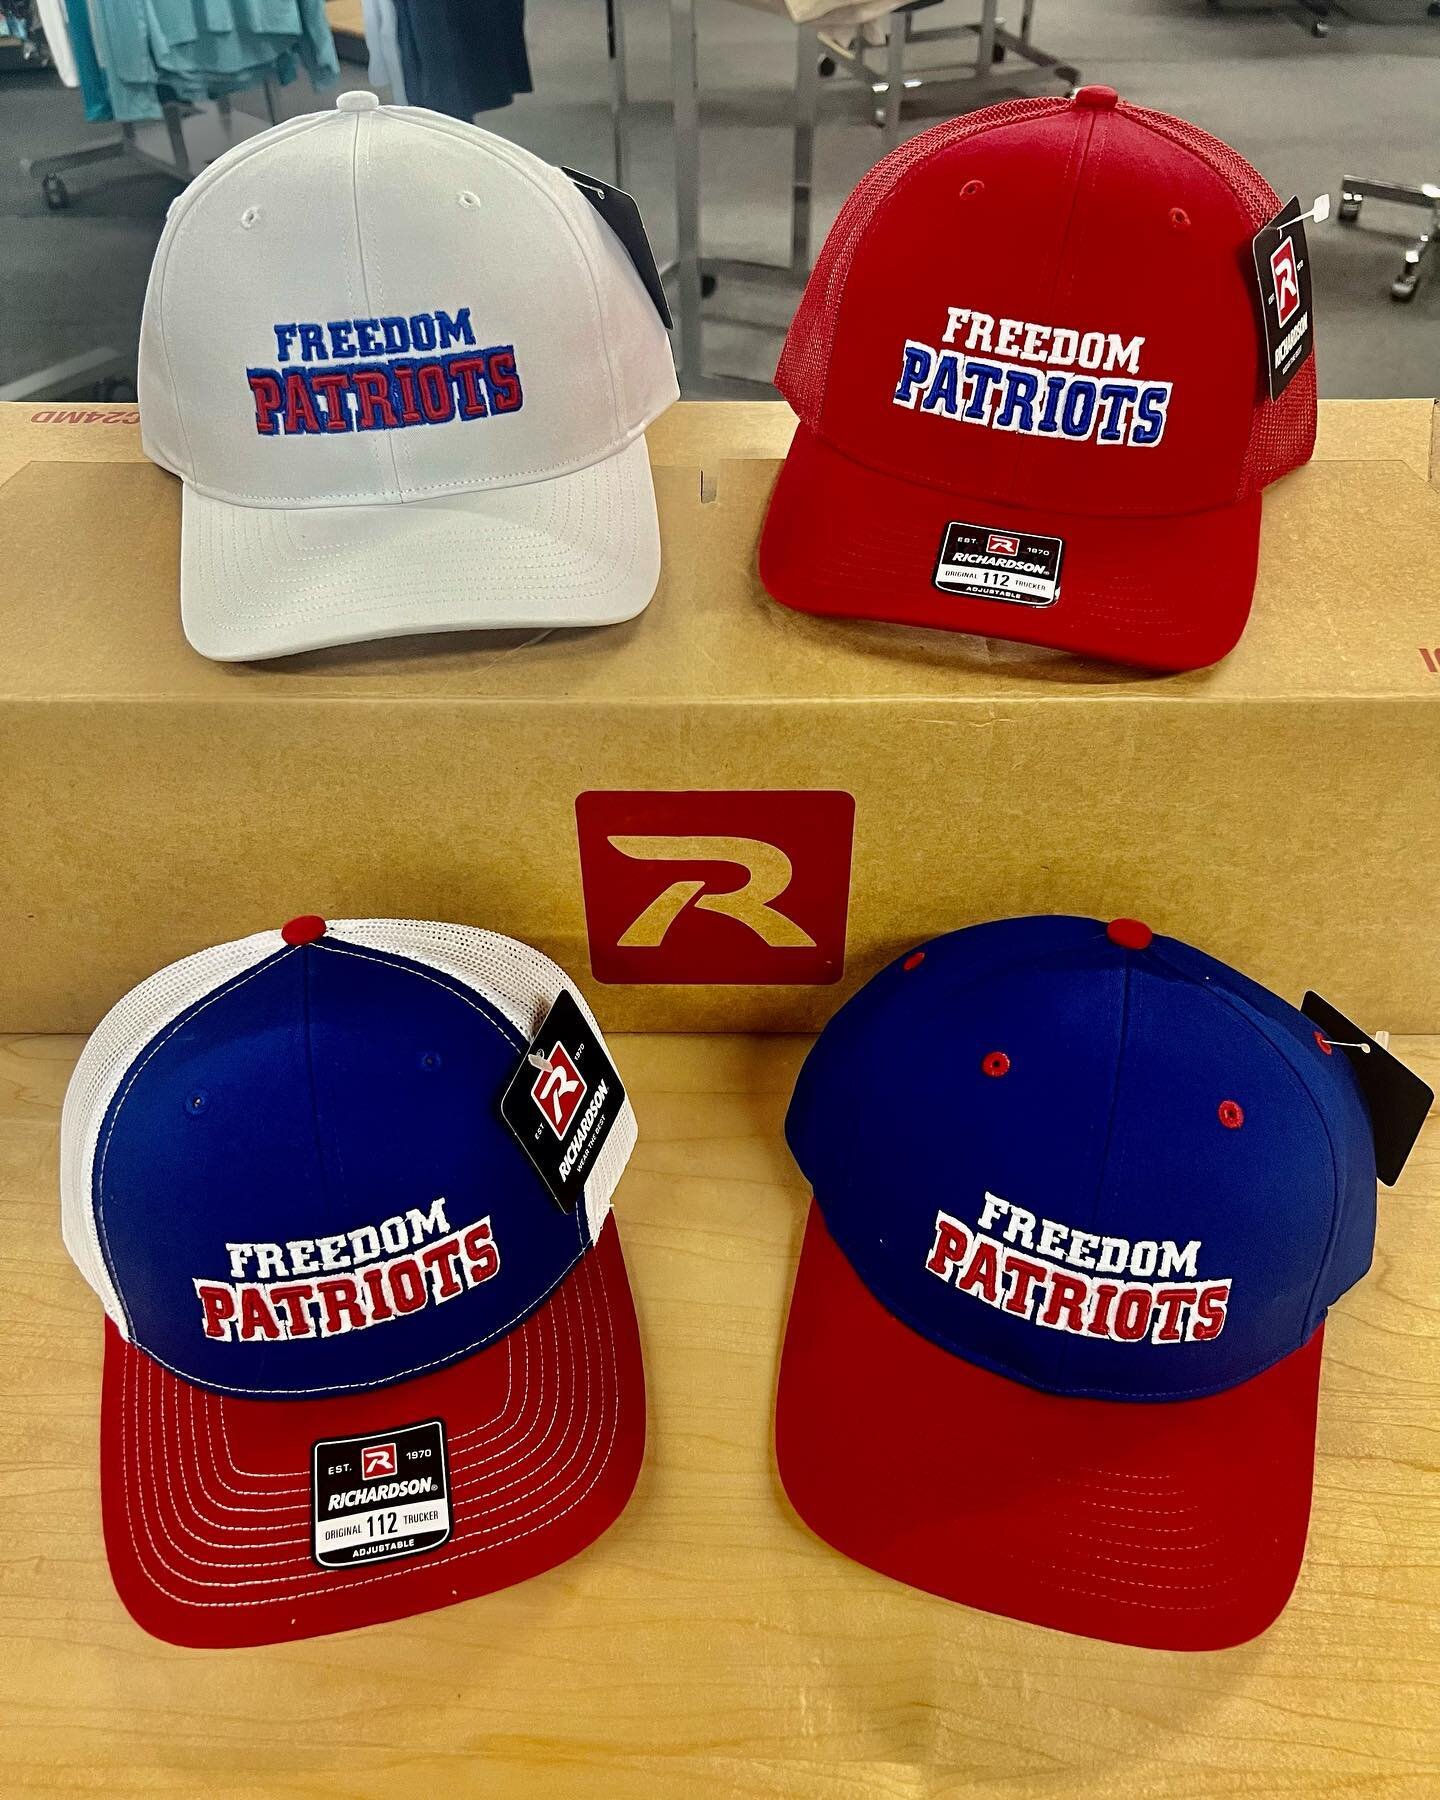 High School Hats are here! Richardson Hats for Freedom, Patton, &amp; Draughn high schools have arrived at cbs sports. All on Richardson&rsquo;s hats!